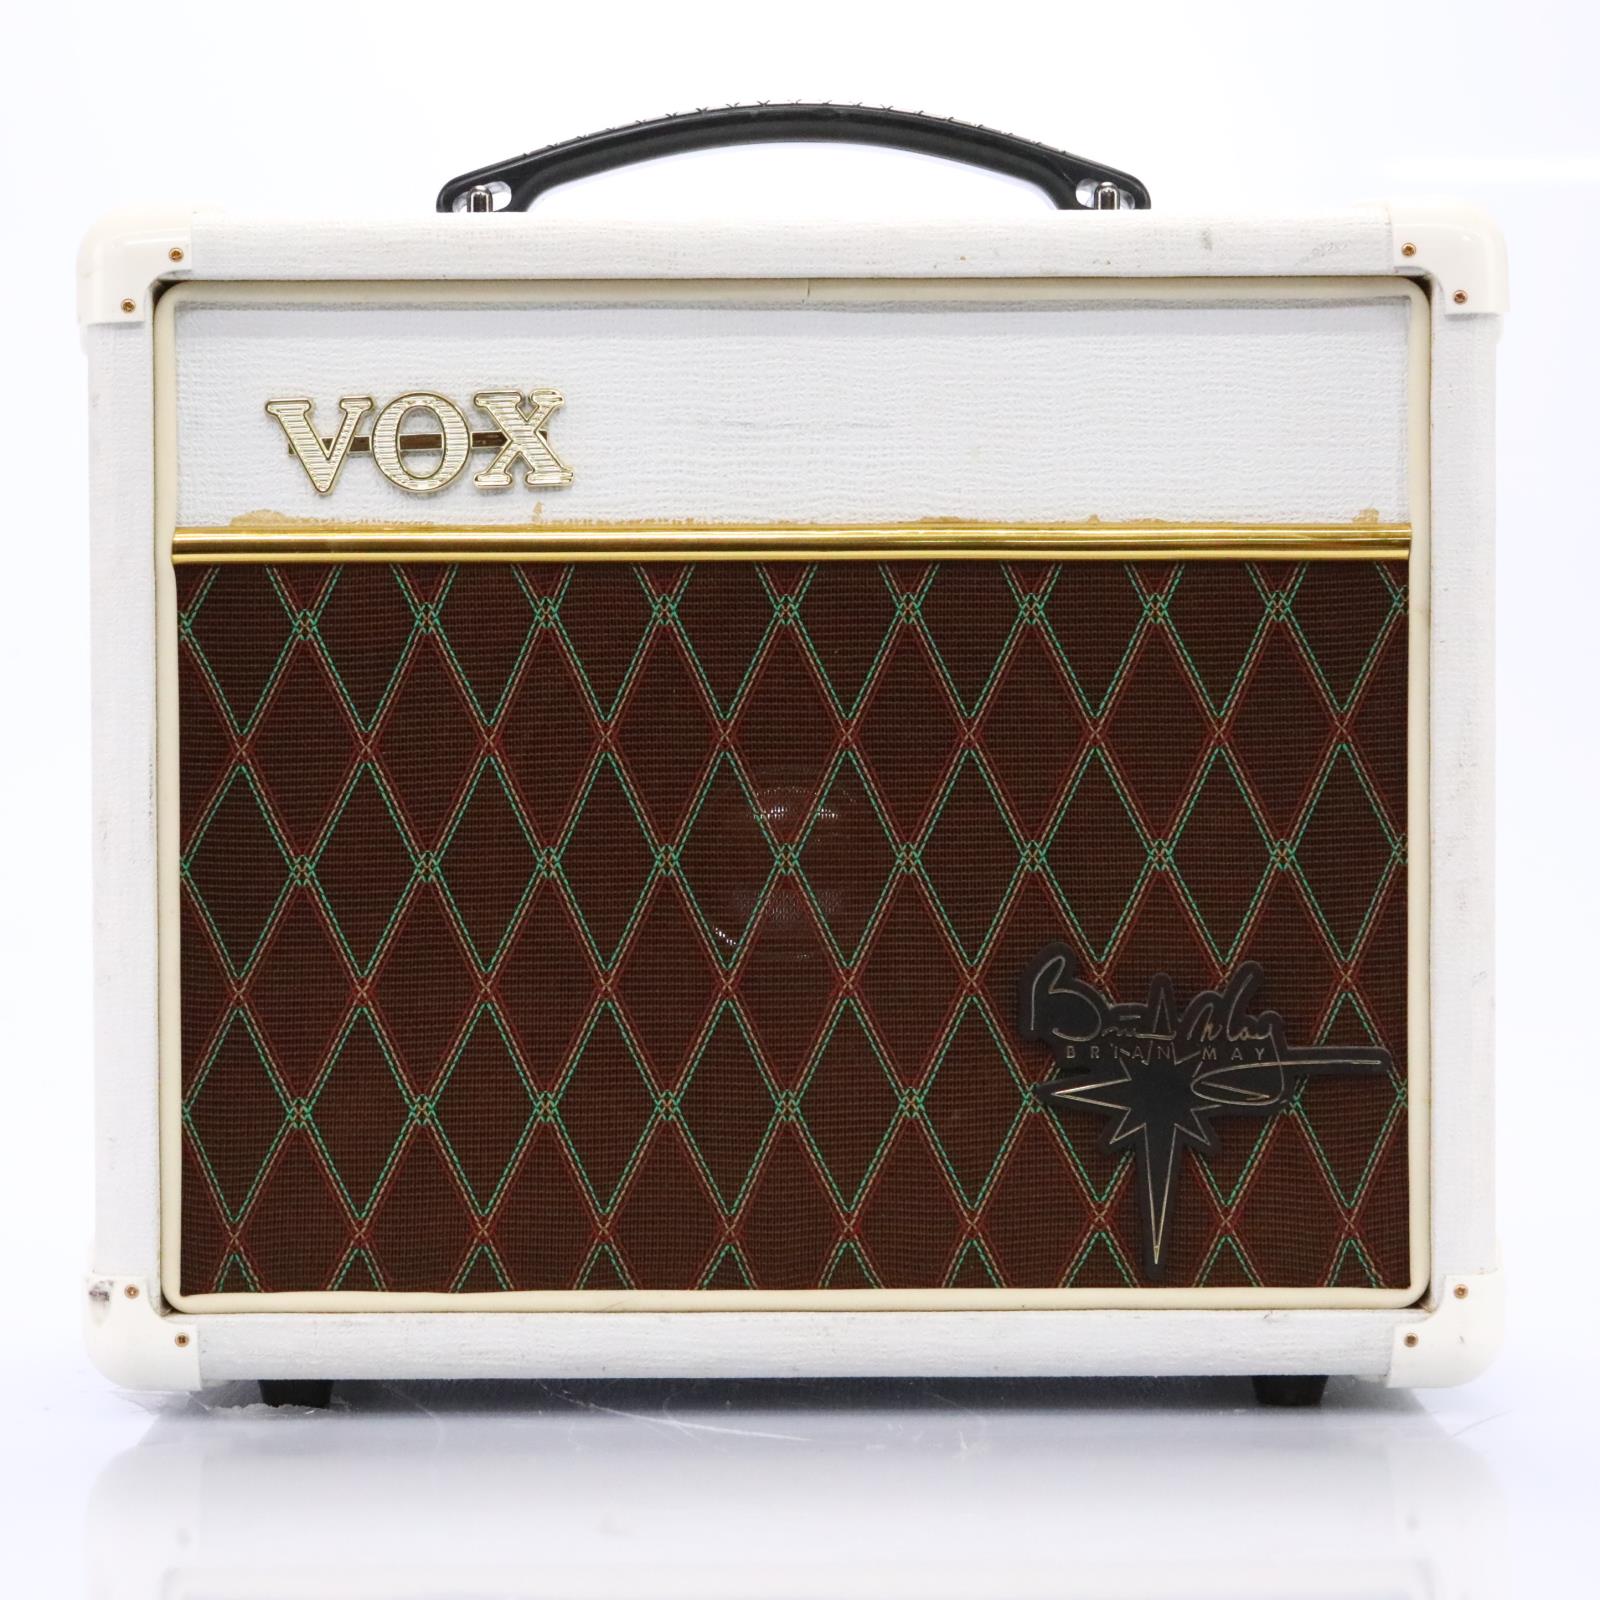 Vox VBM1 Brian May Special Recording 1x6.5" Solid State Guitar Combo Amp #50709